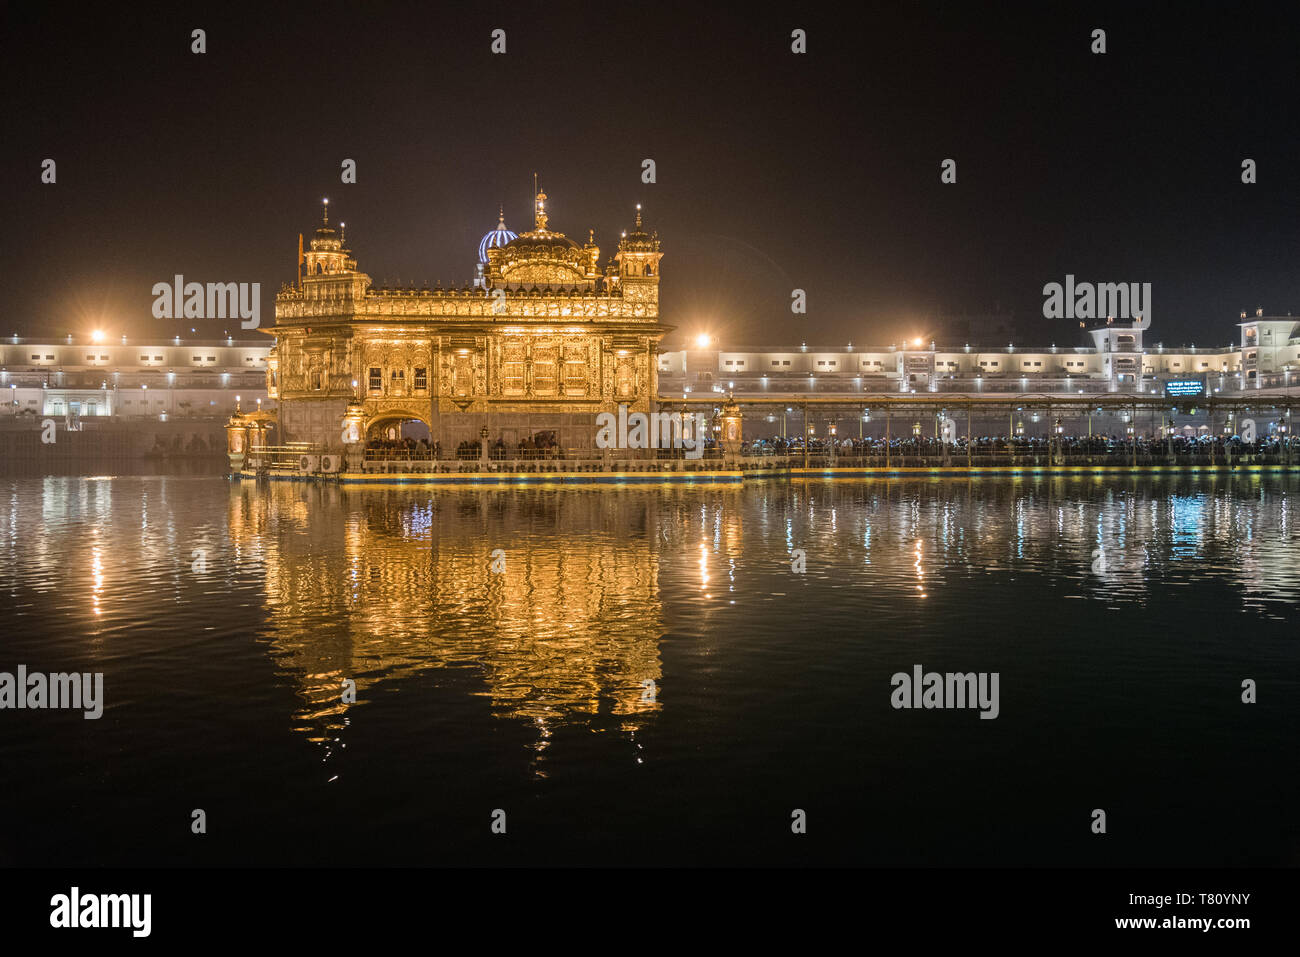 Night time reflections, The Golden Temple, Amritsar, Punjab, India, Asia Stock Photo